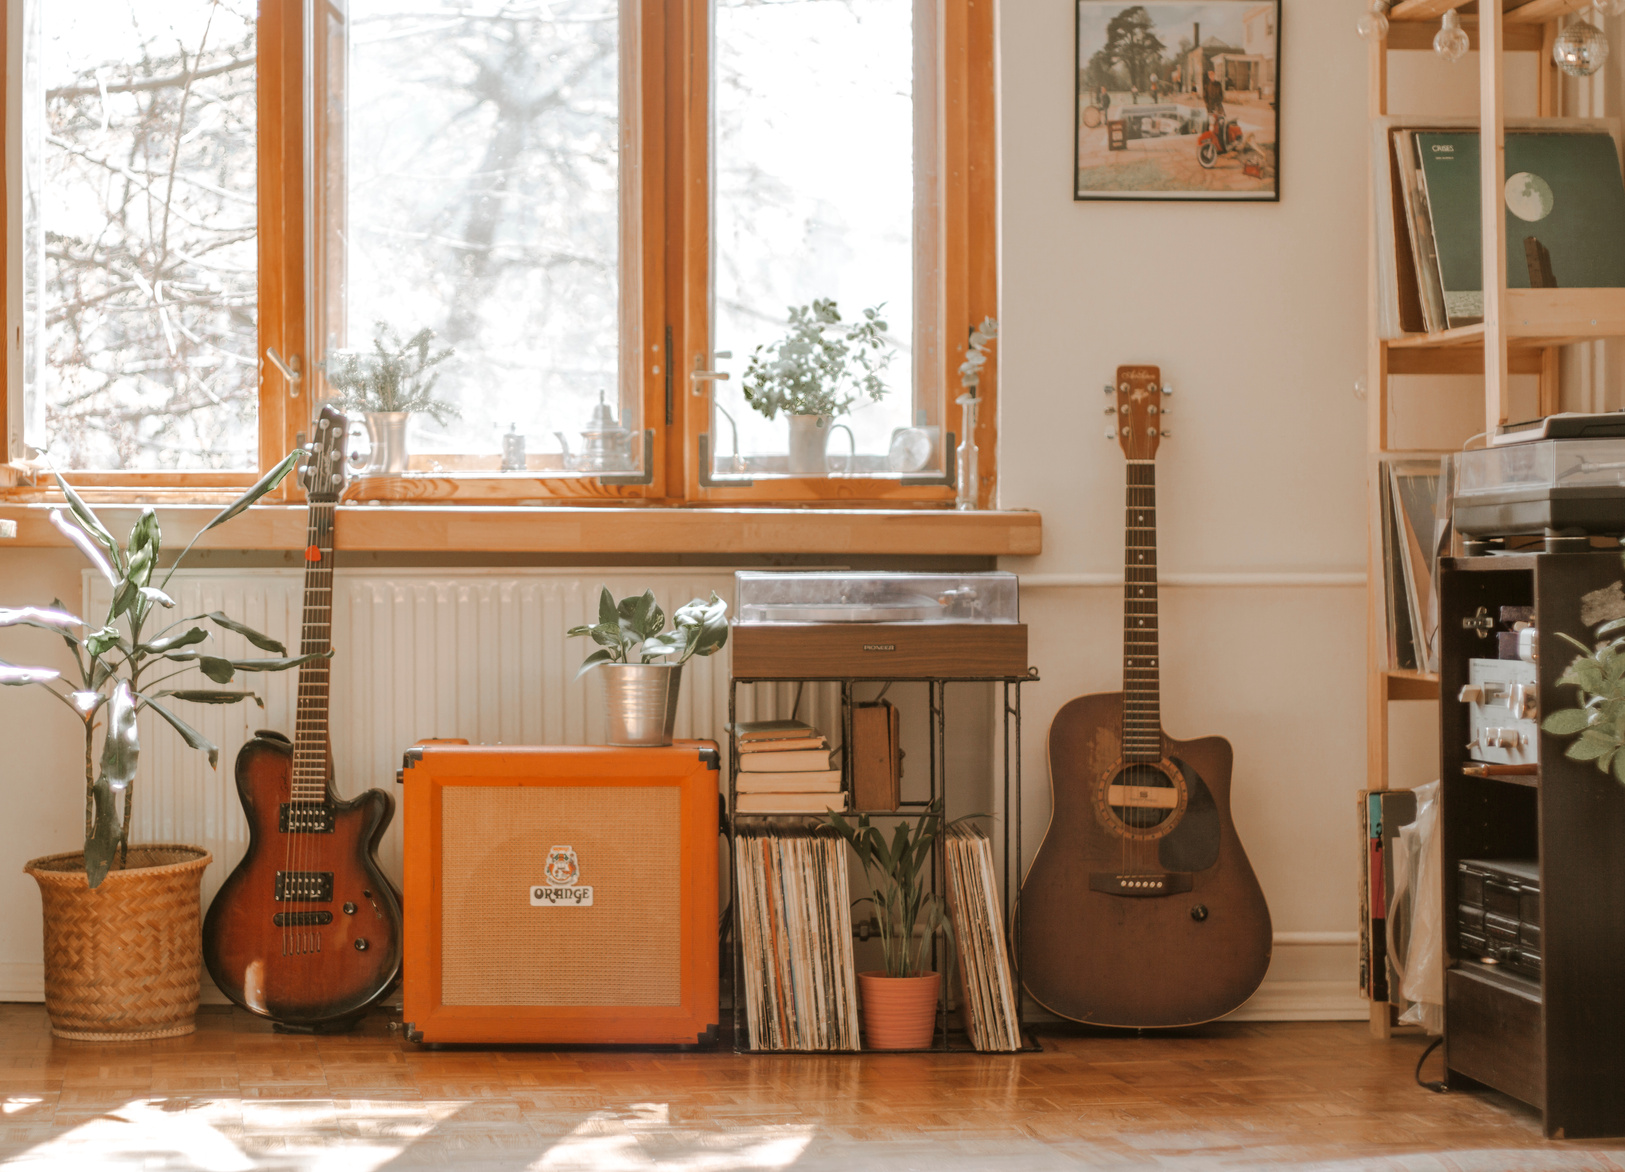 Room interior with guitars and musical equipment near shelves and plants